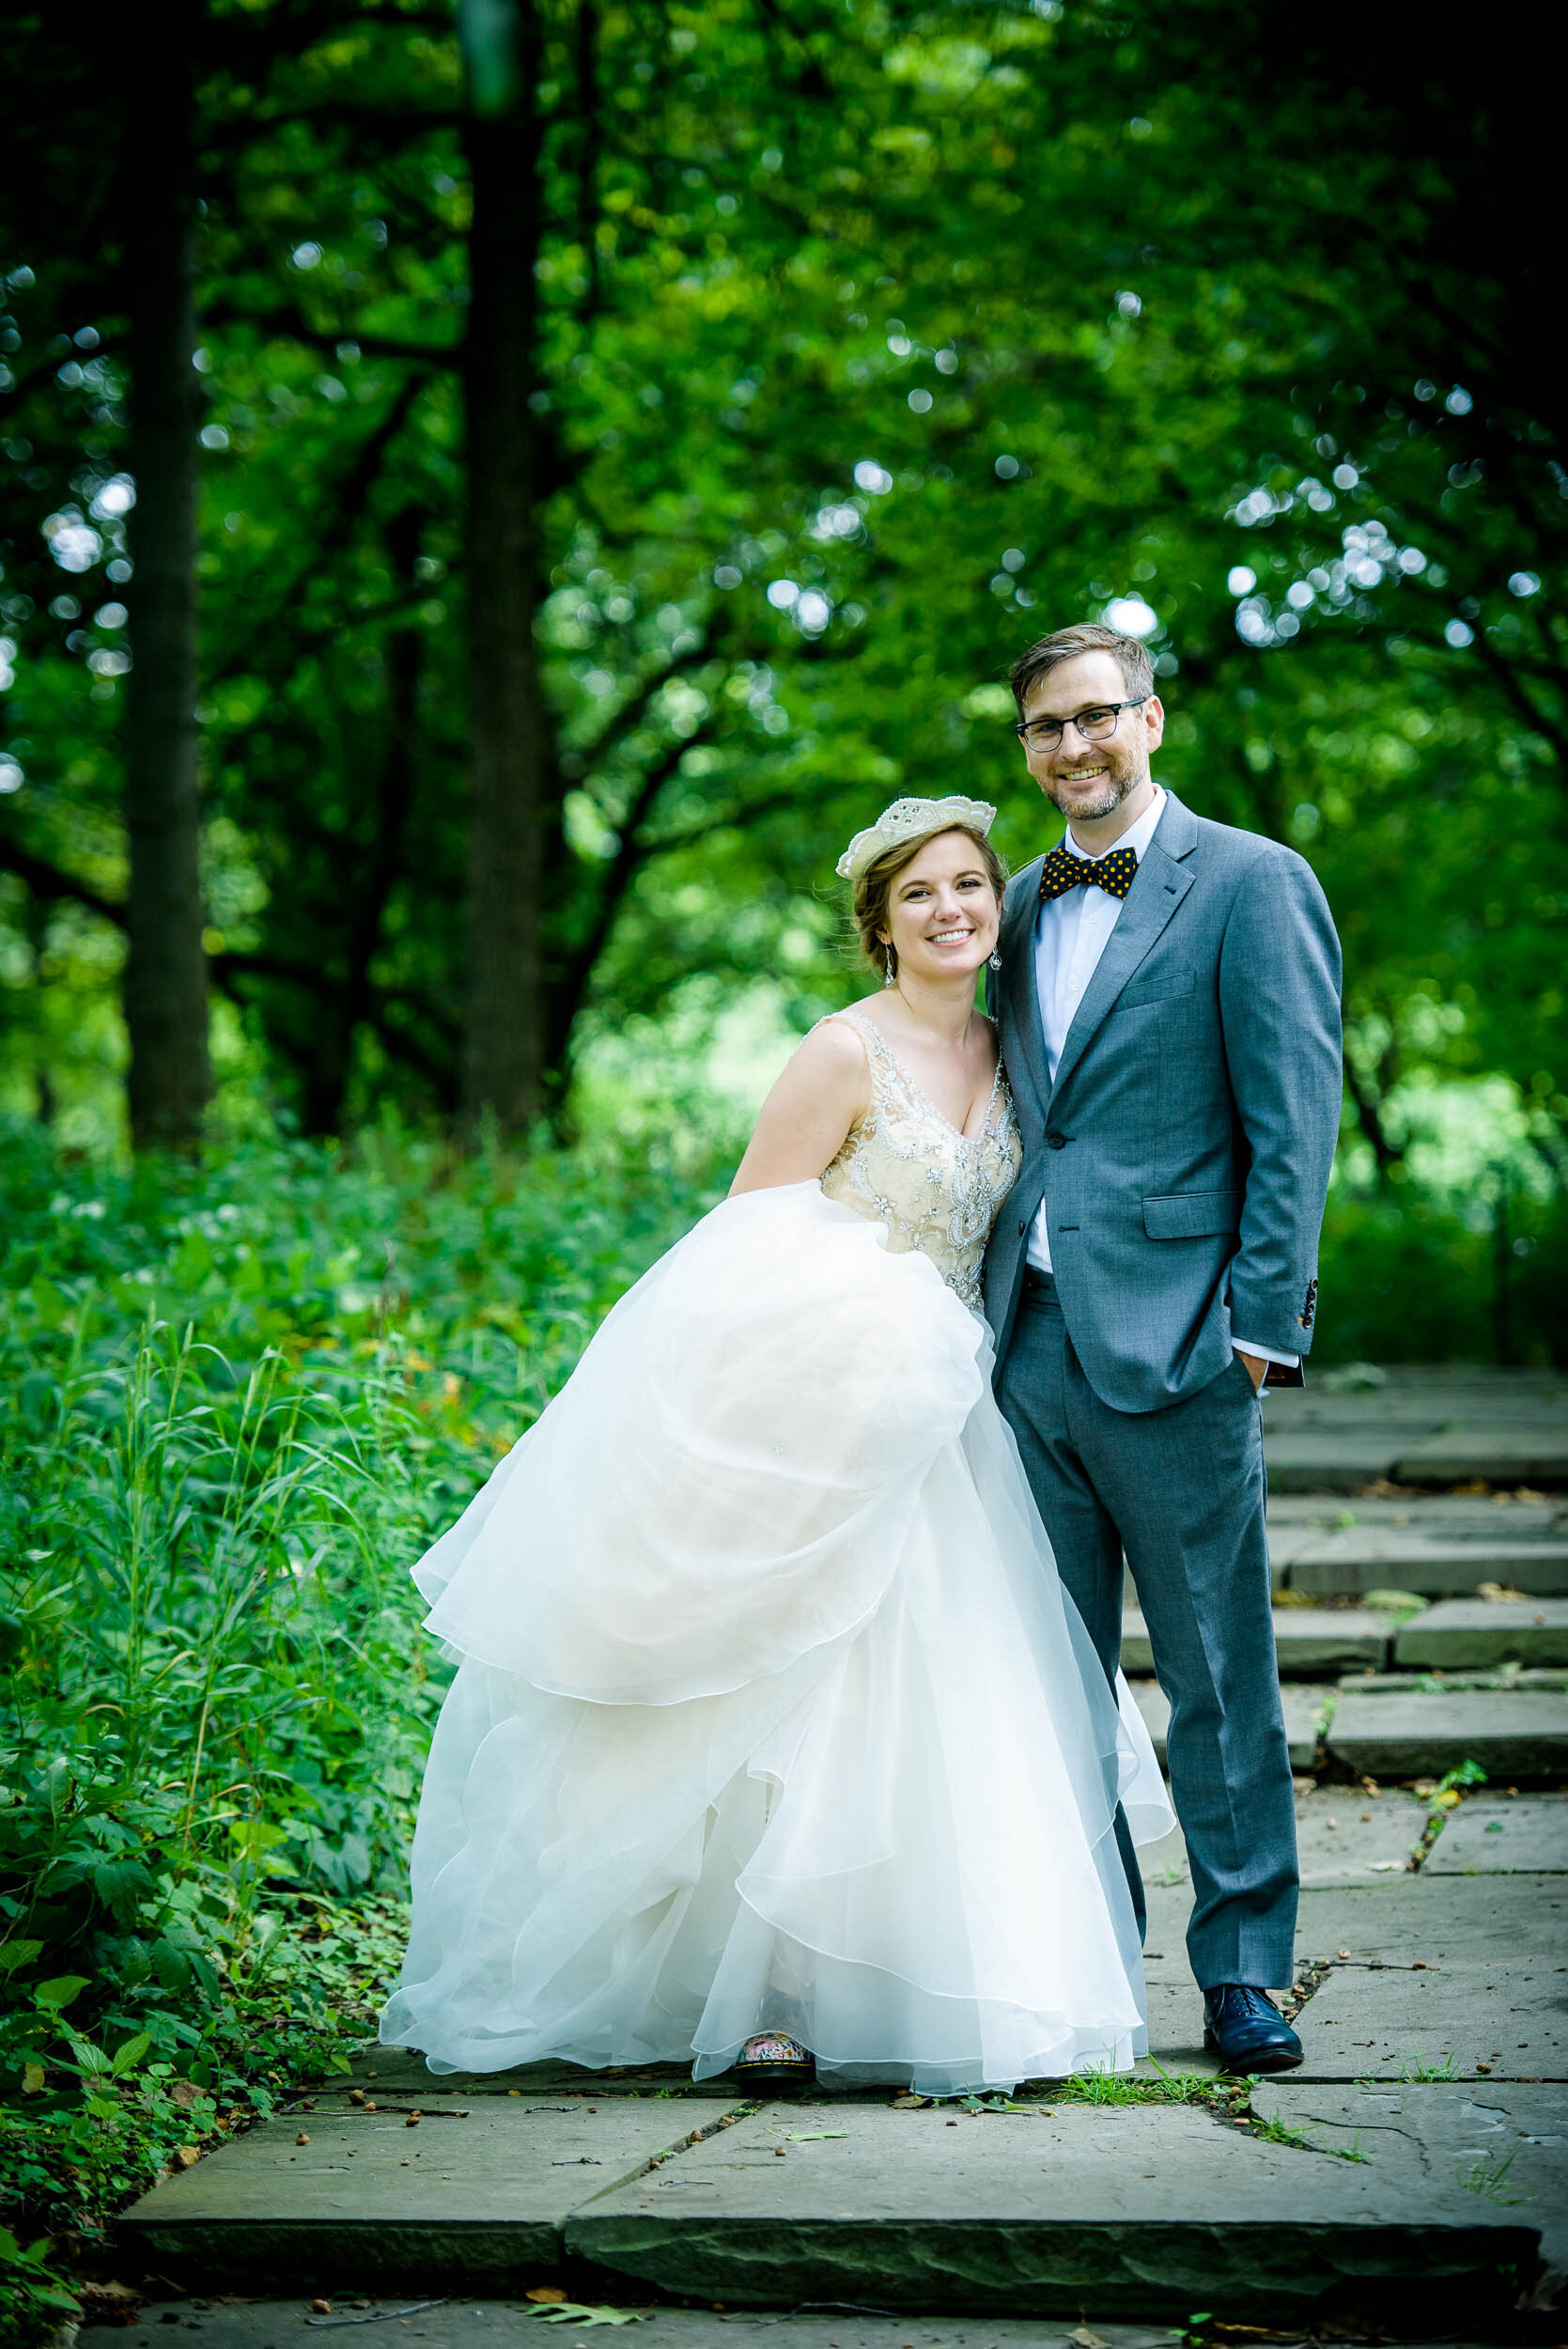 Bride and groom wedding day portrait: Columbus Park Refectory Chicago wedding captured by J. Brown Photography.